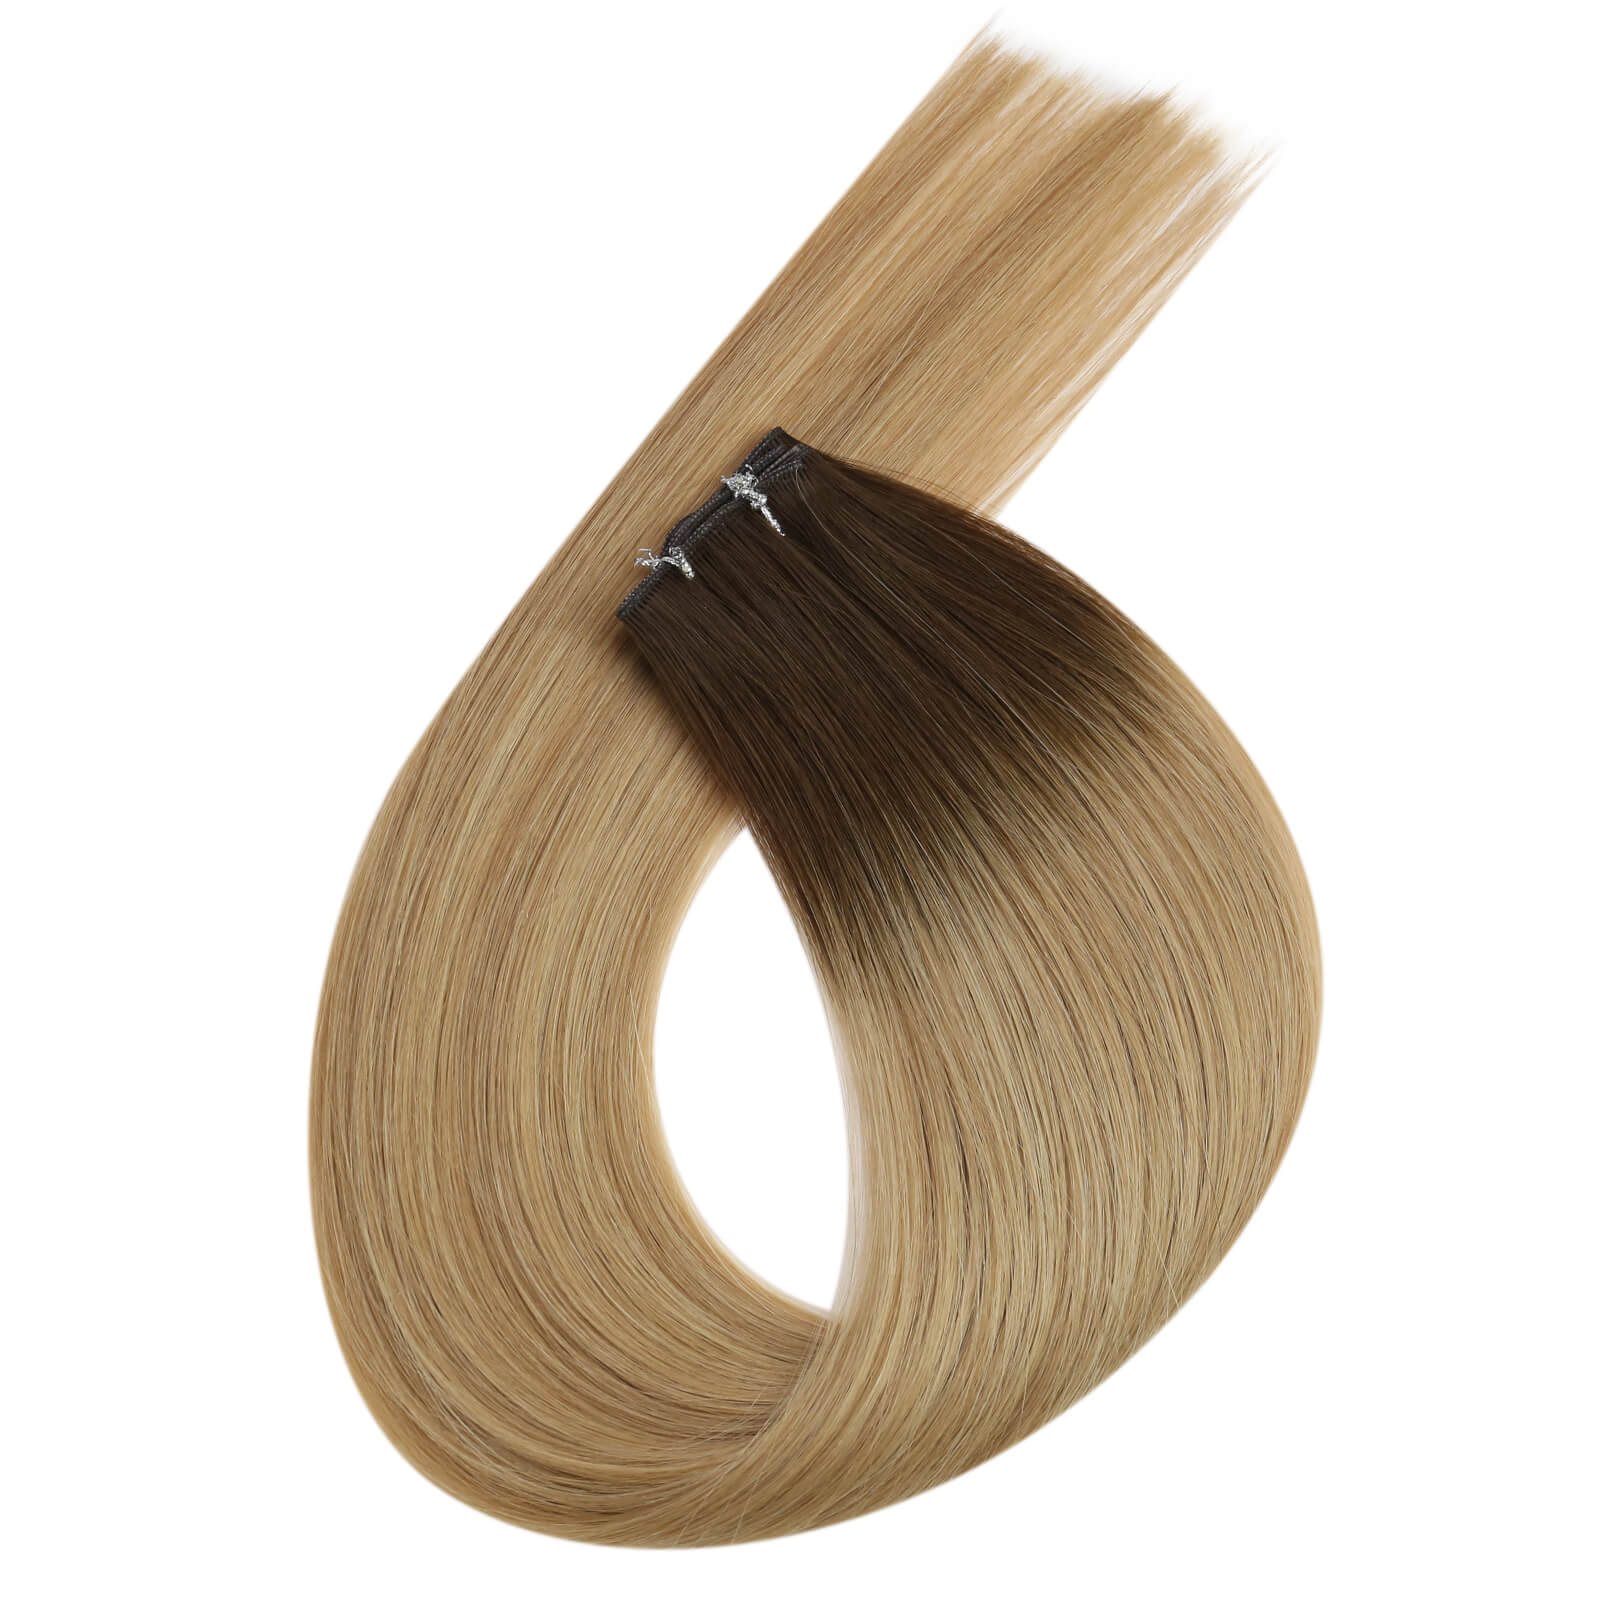 professional weft hair extensions genius weft extensions for salon